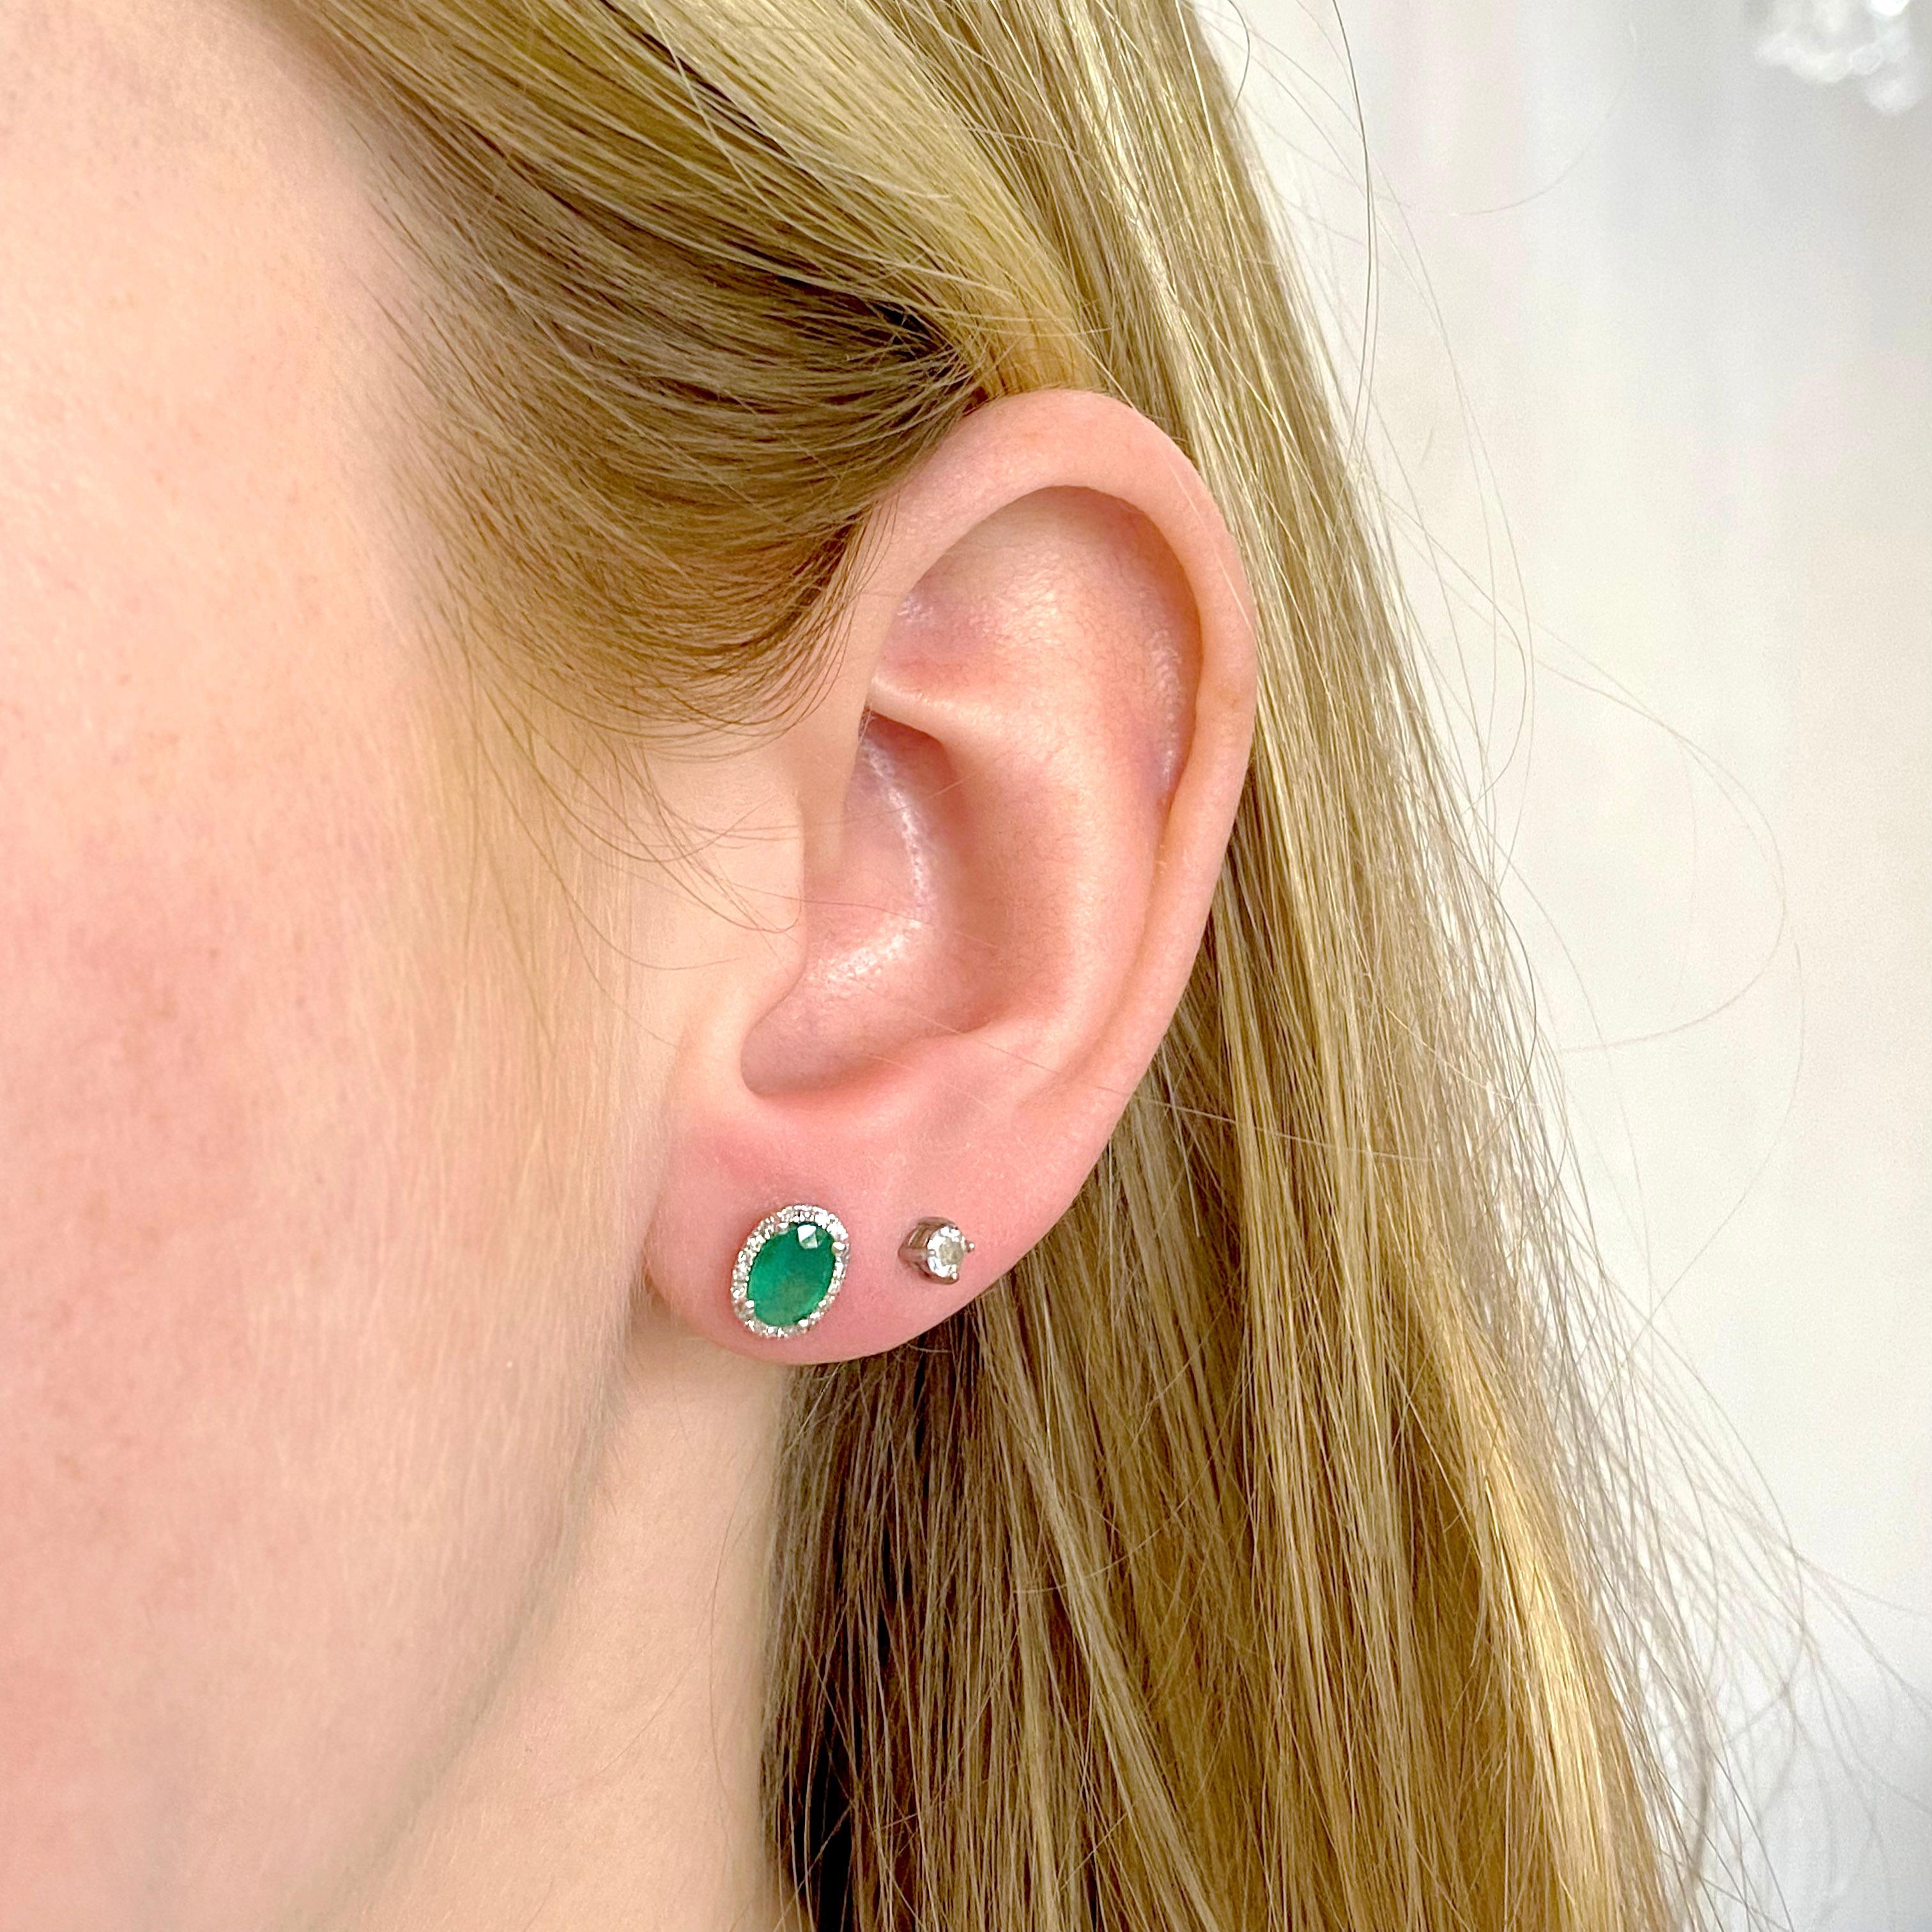 Contemporary Oval Emerald Earring with Diamond Halo Post Stud Style, Green Emeralds